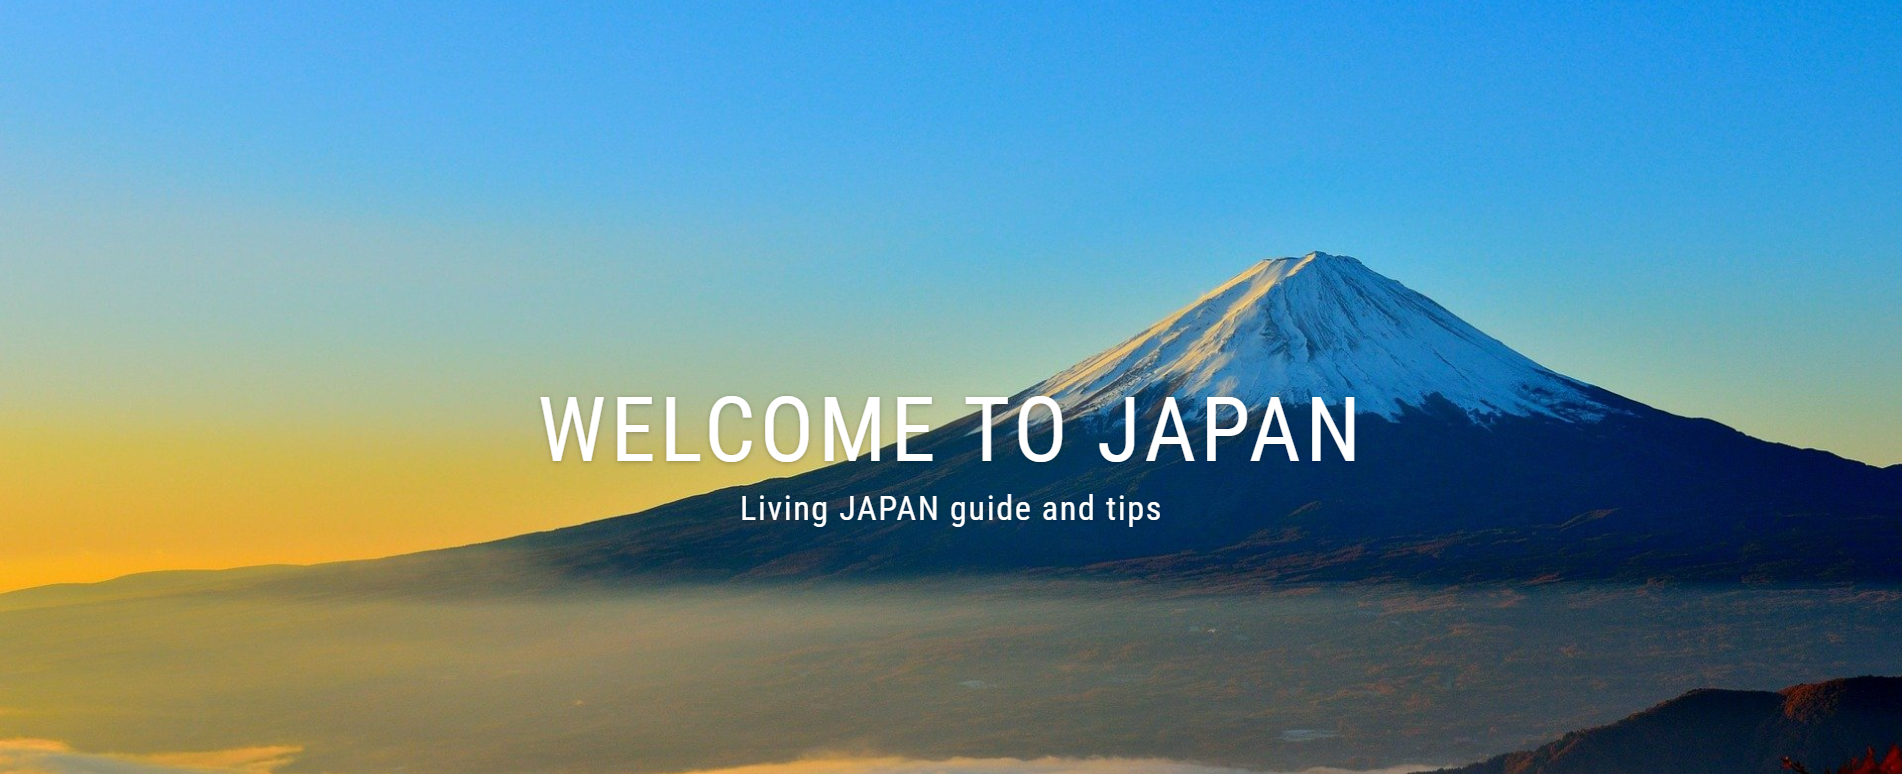 Living JAPAN guide and tips